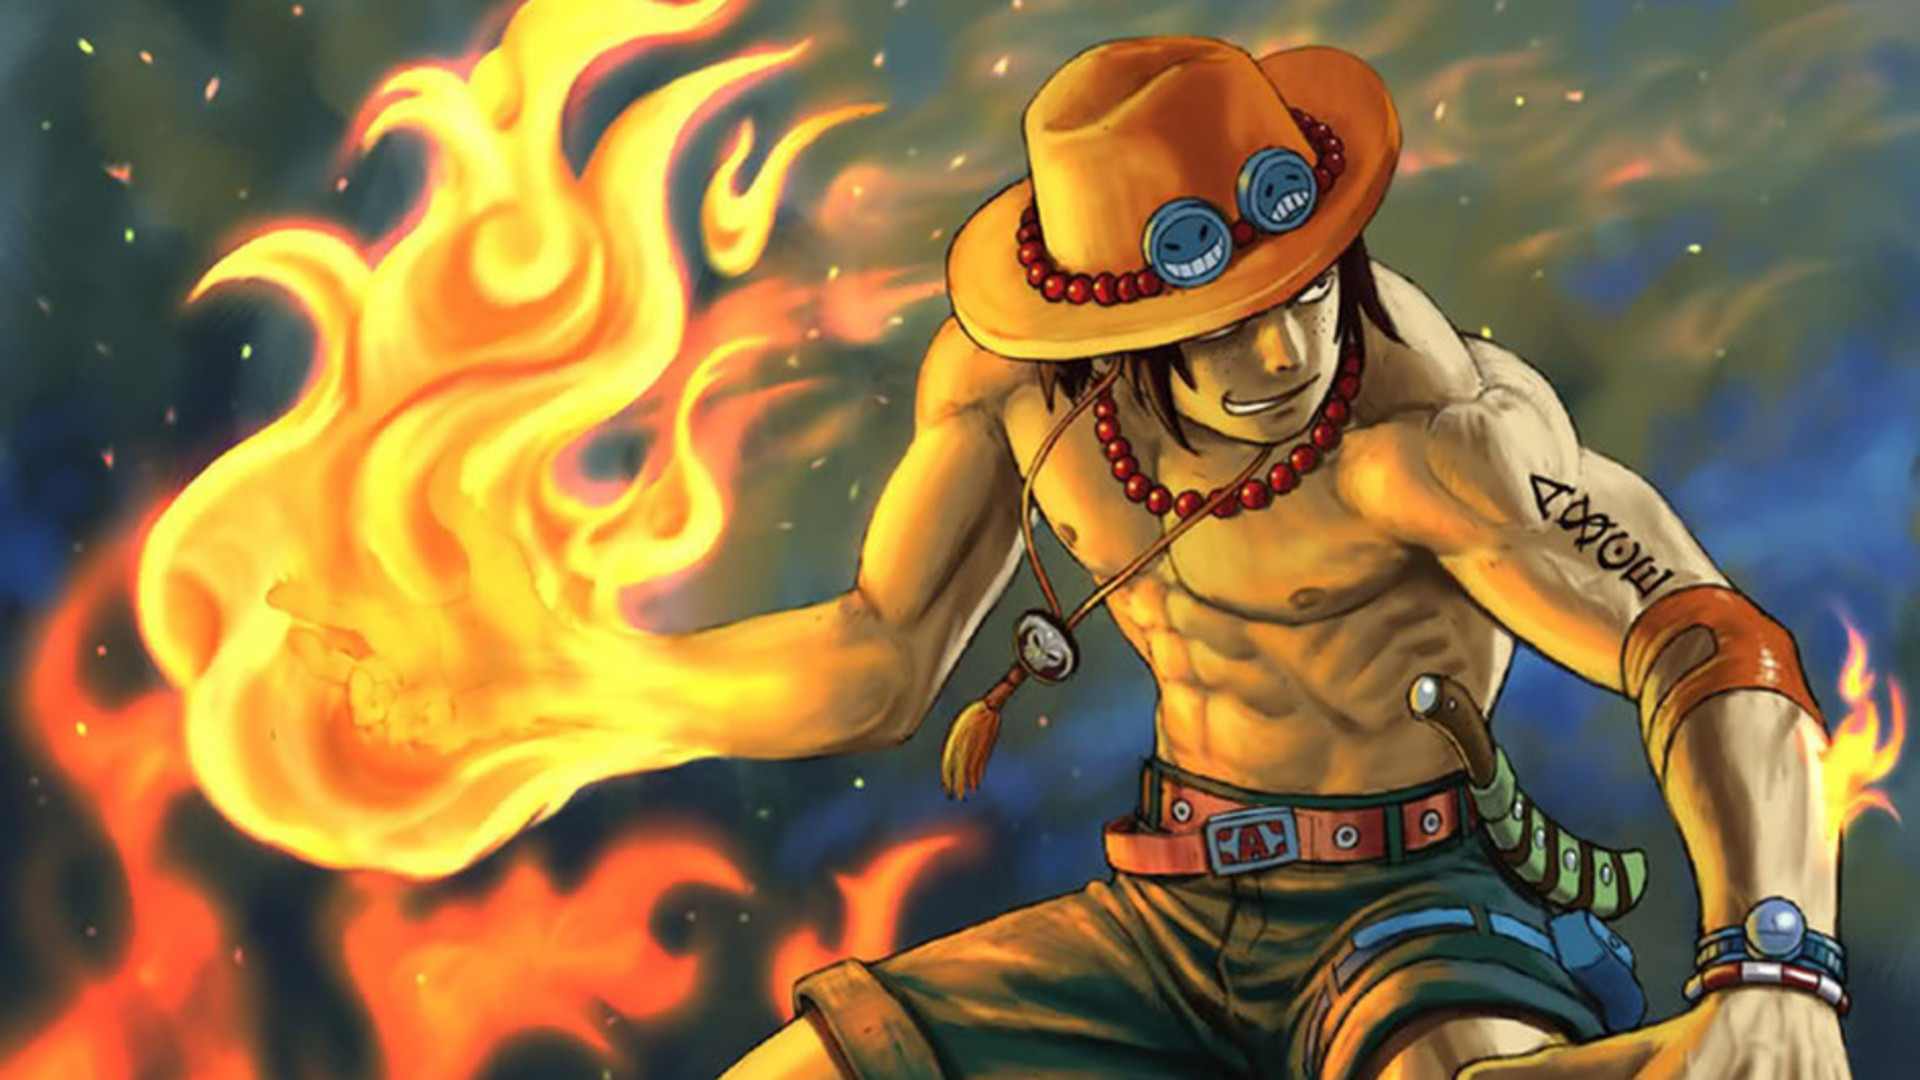 Cool One Piece Wallpaper Group (88)